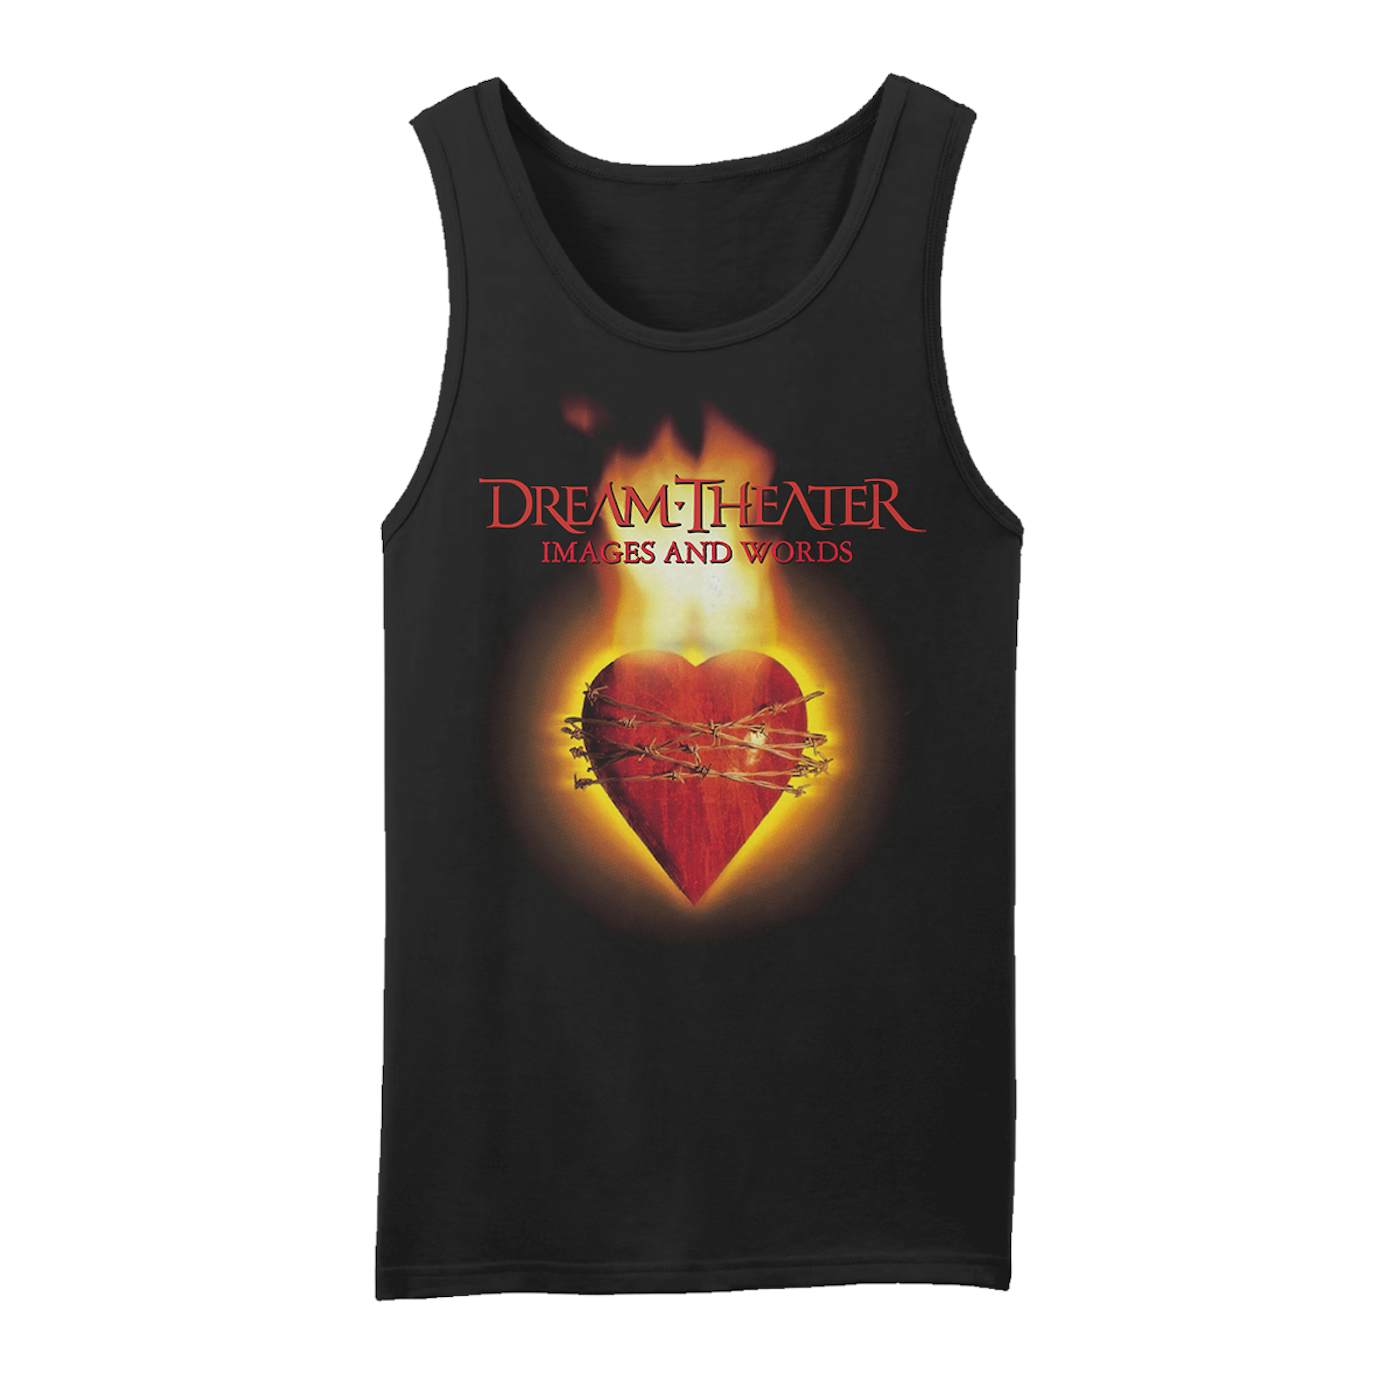 Dream Theater Images and Words 30th Anniversary Flaming Heart Tank Top